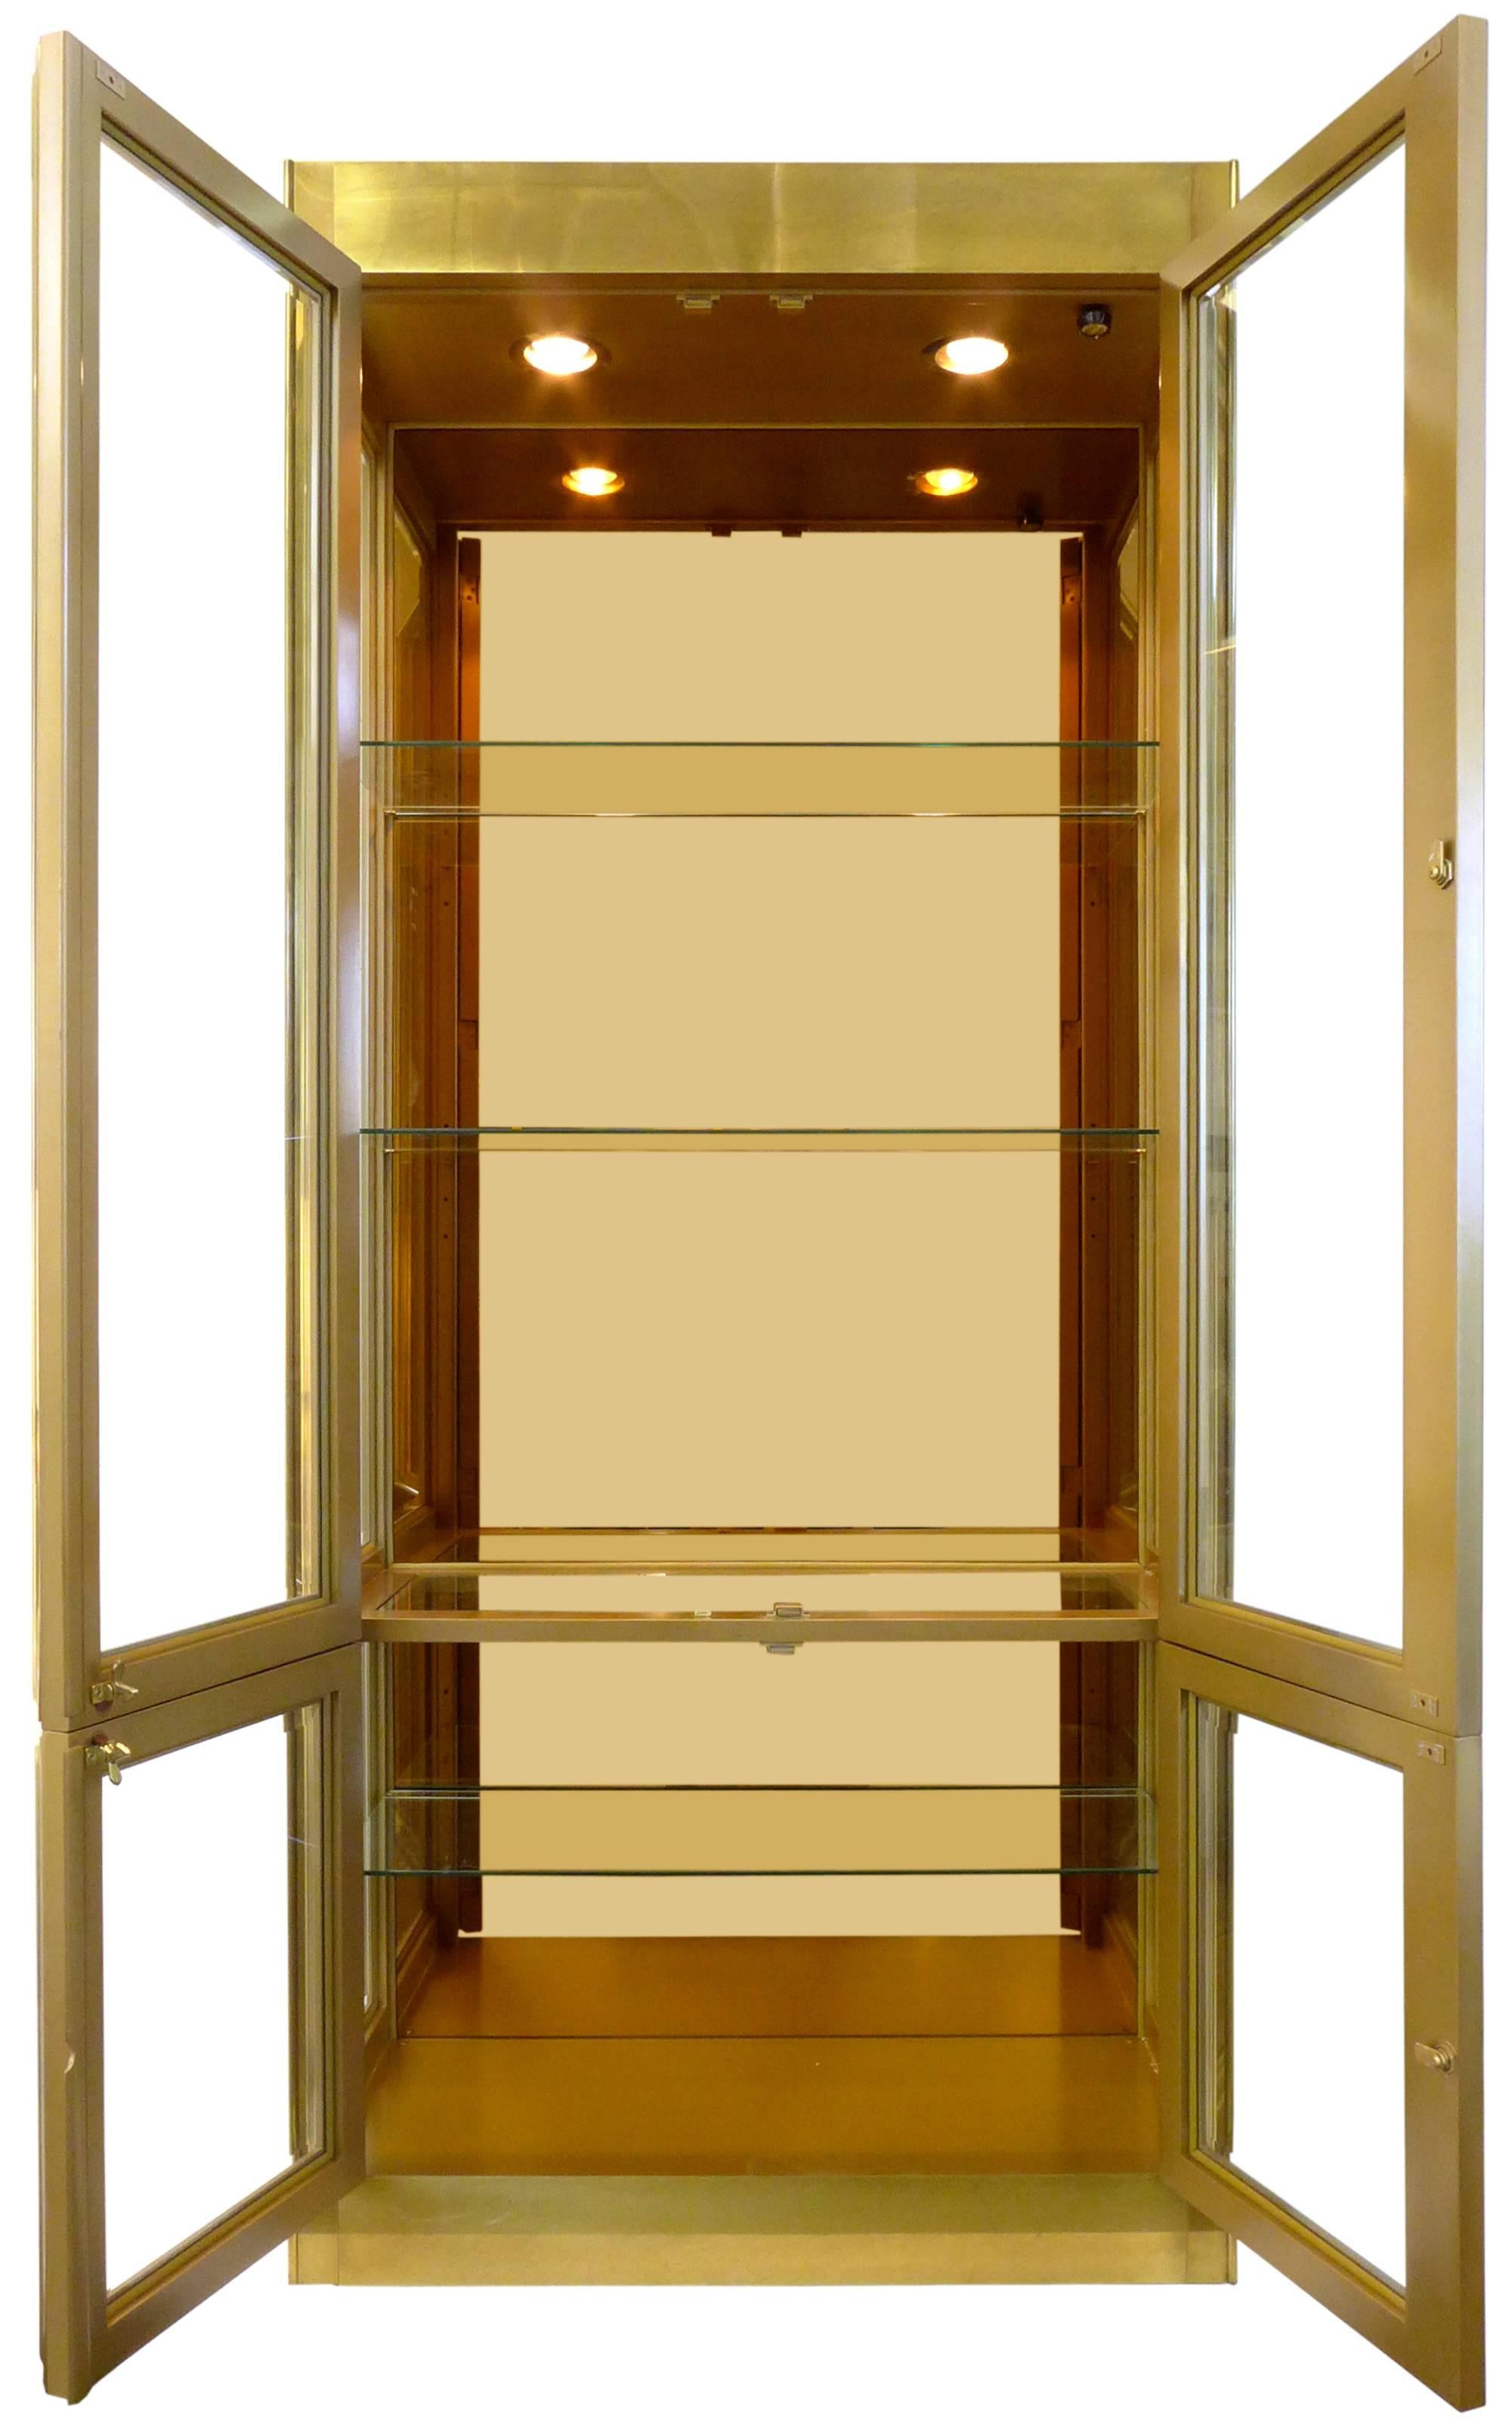 A large and impressive, brass-clad display case by Mastercraft. A striking, monolithic form elegant in every detail: Adjustable glass shelves, mirrored back, two dimmer-switched overhead lights and graceful frame details on the door-fronts. In